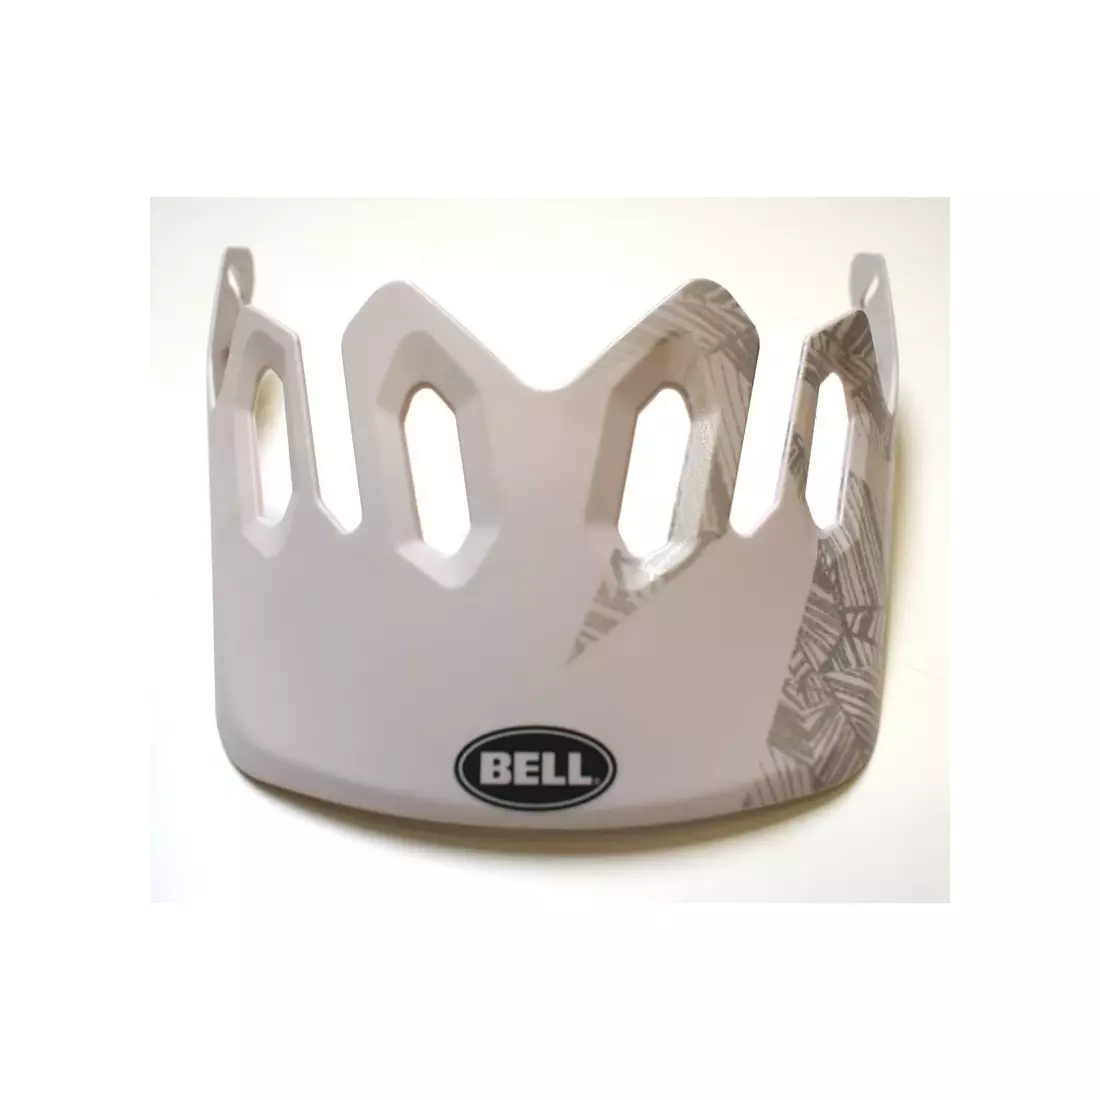 BELL canopy for bicycle helmet SUPER white silver BEL-8002838